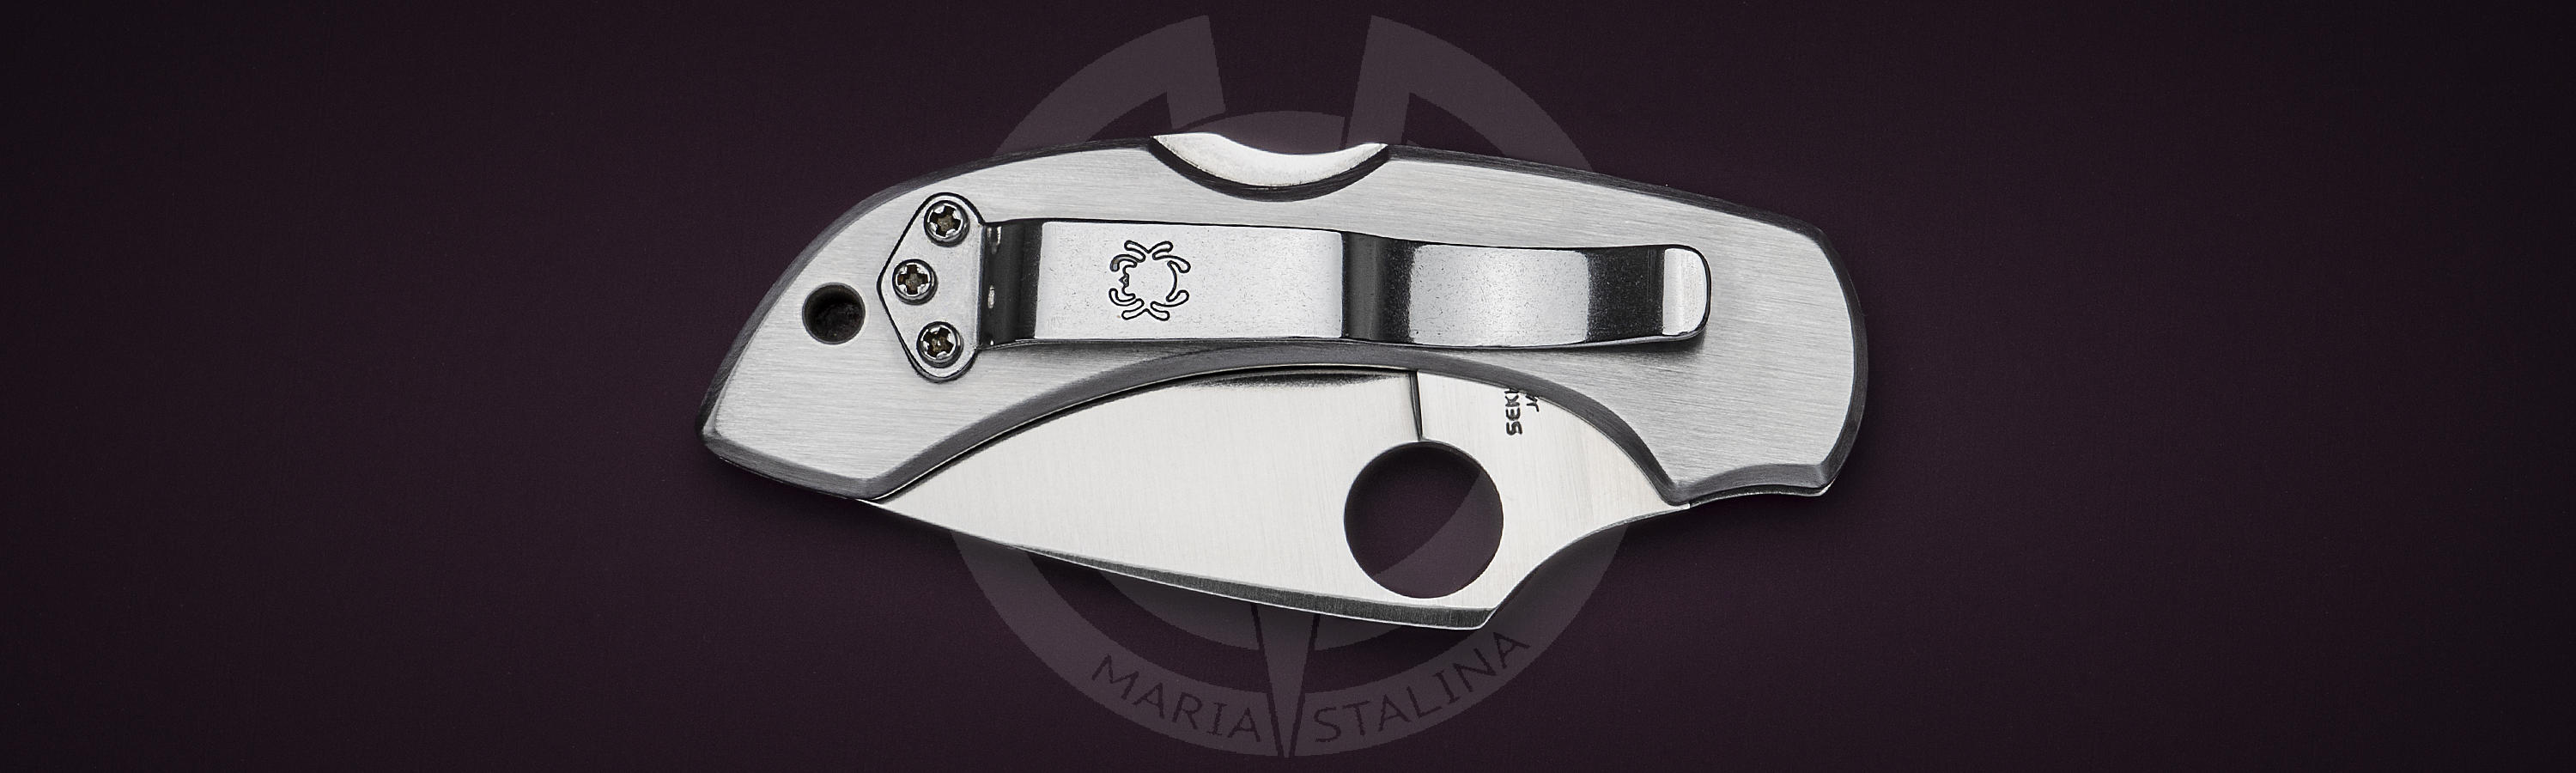 The Round Hole allows to open a folding knife with only one hand